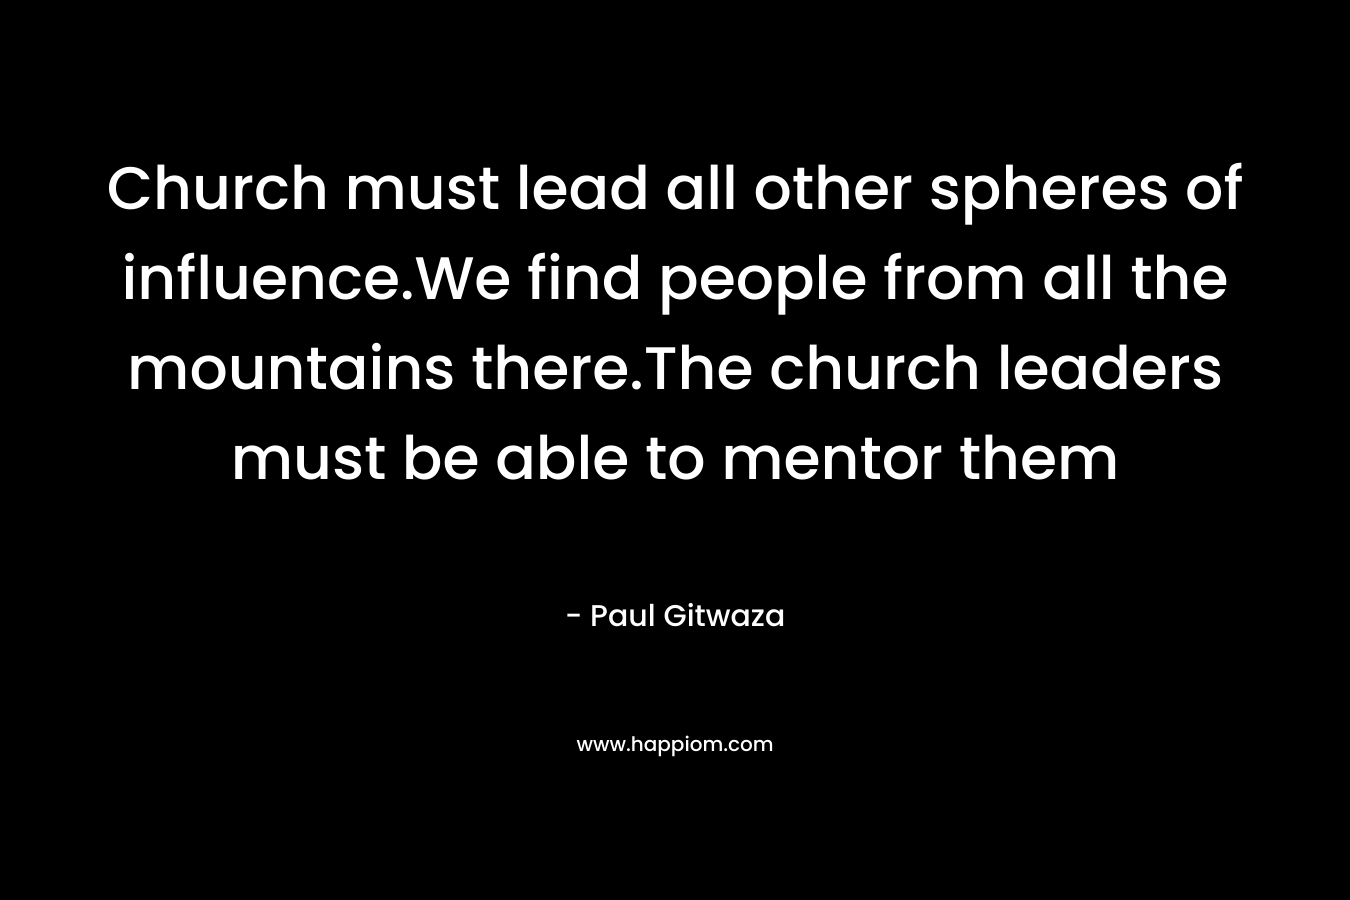 Church must lead all other spheres of influence.We find people from all the mountains there.The church leaders must be able to mentor them